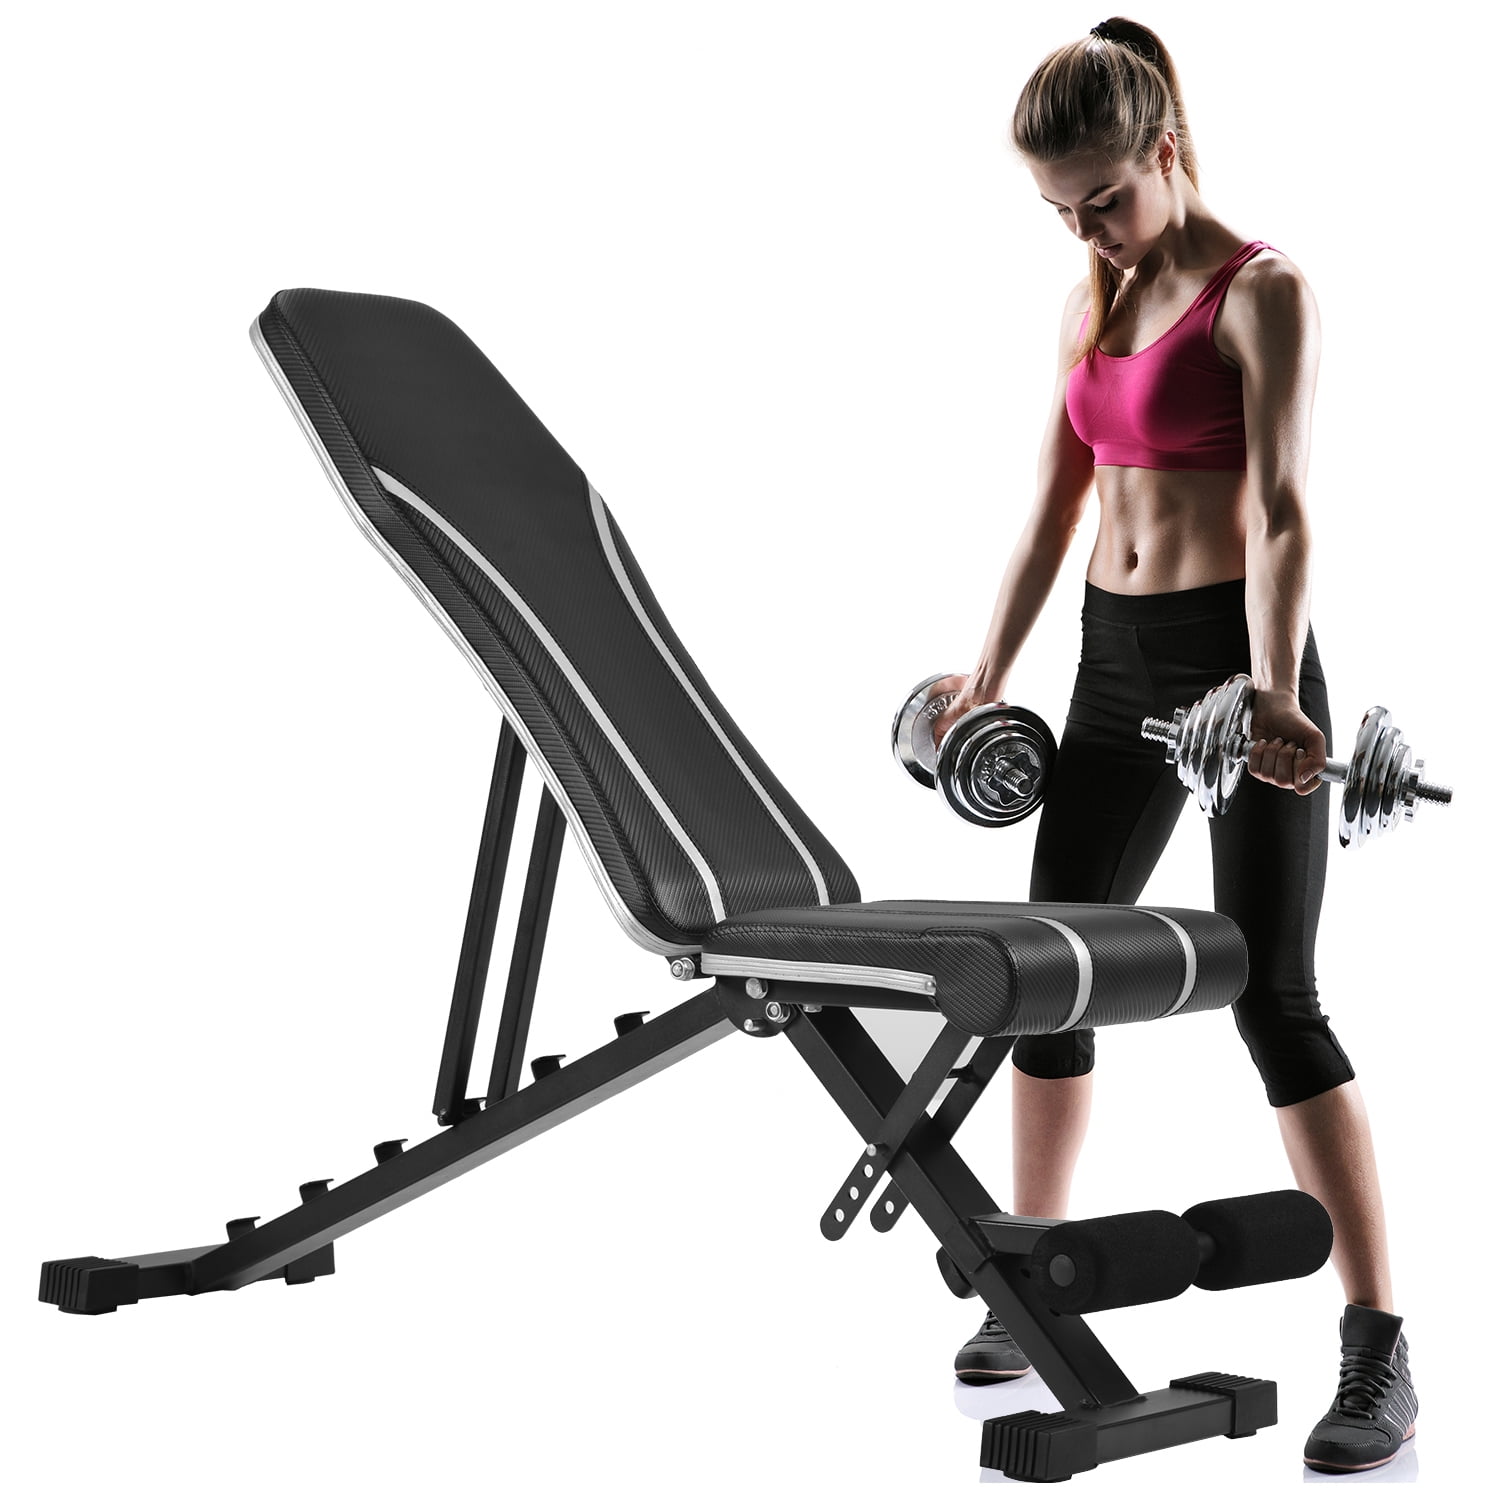 5 Day Fitness gear workout bench with Comfort Workout Clothes